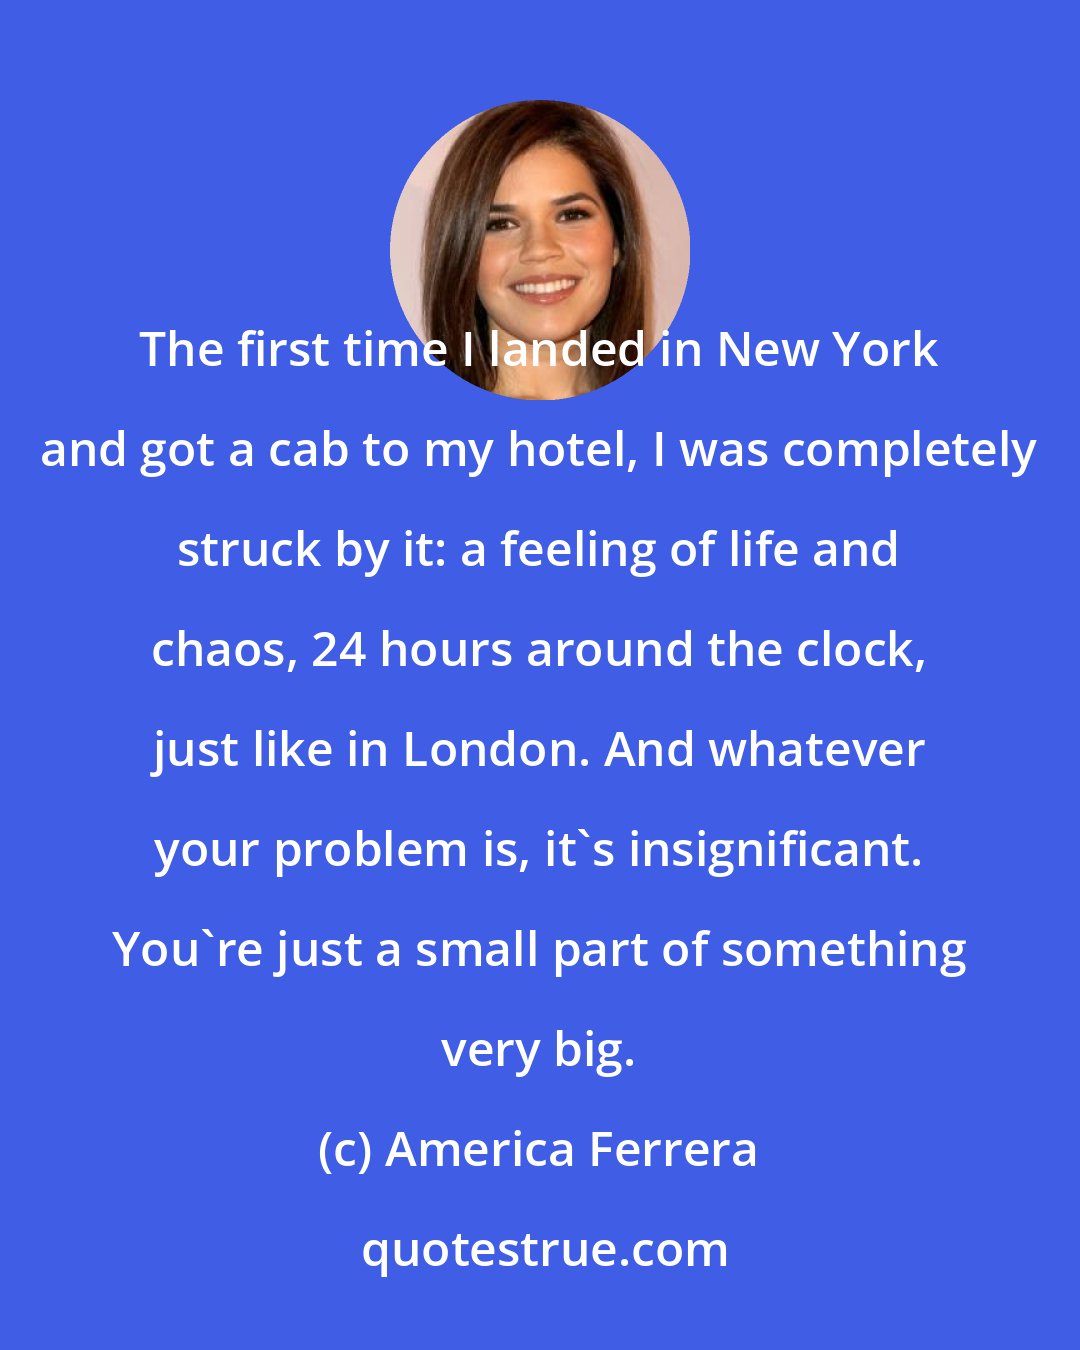 America Ferrera: The first time I landed in New York and got a cab to my hotel, I was completely struck by it: a feeling of life and chaos, 24 hours around the clock, just like in London. And whatever your problem is, it's insignificant. You're just a small part of something very big.